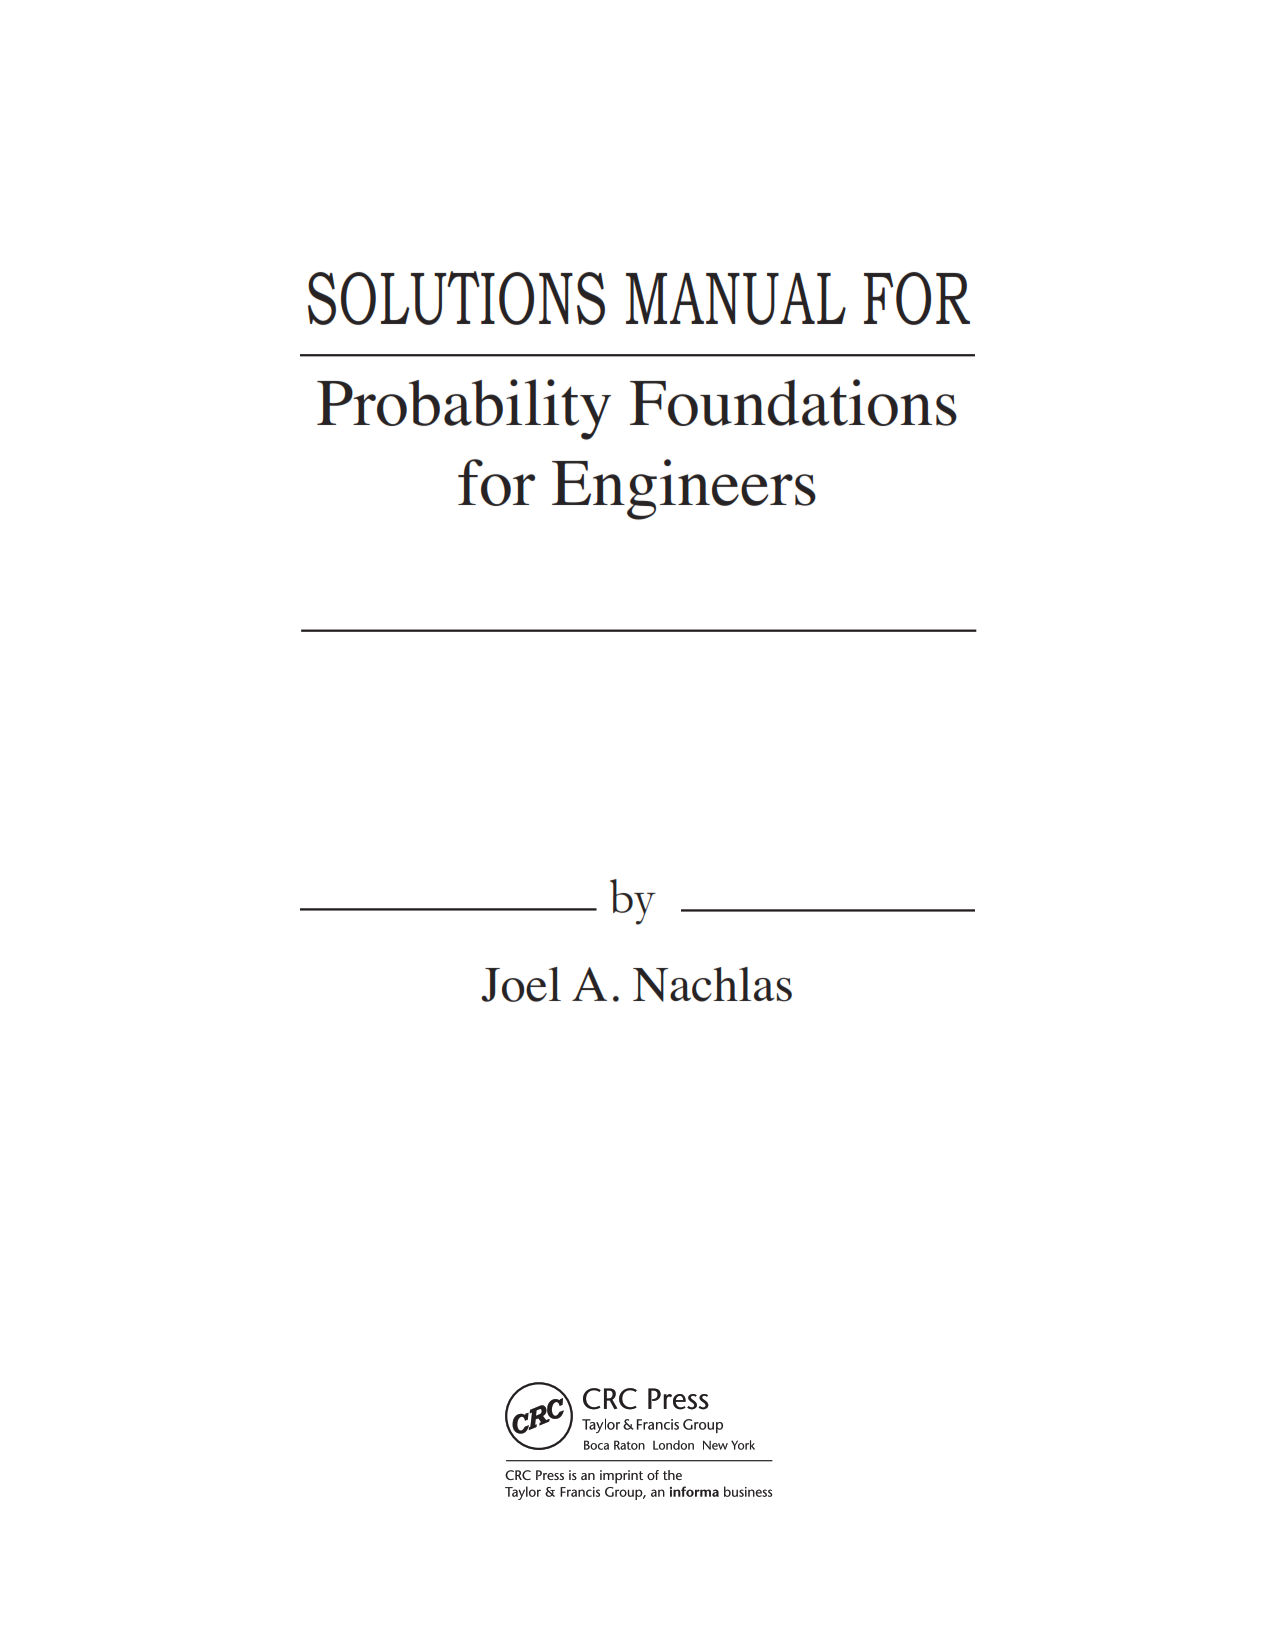 download free probability foundations for engineers Joel A. Nachlas 1st edition solutions manual eBook pdf | gioumeh solution